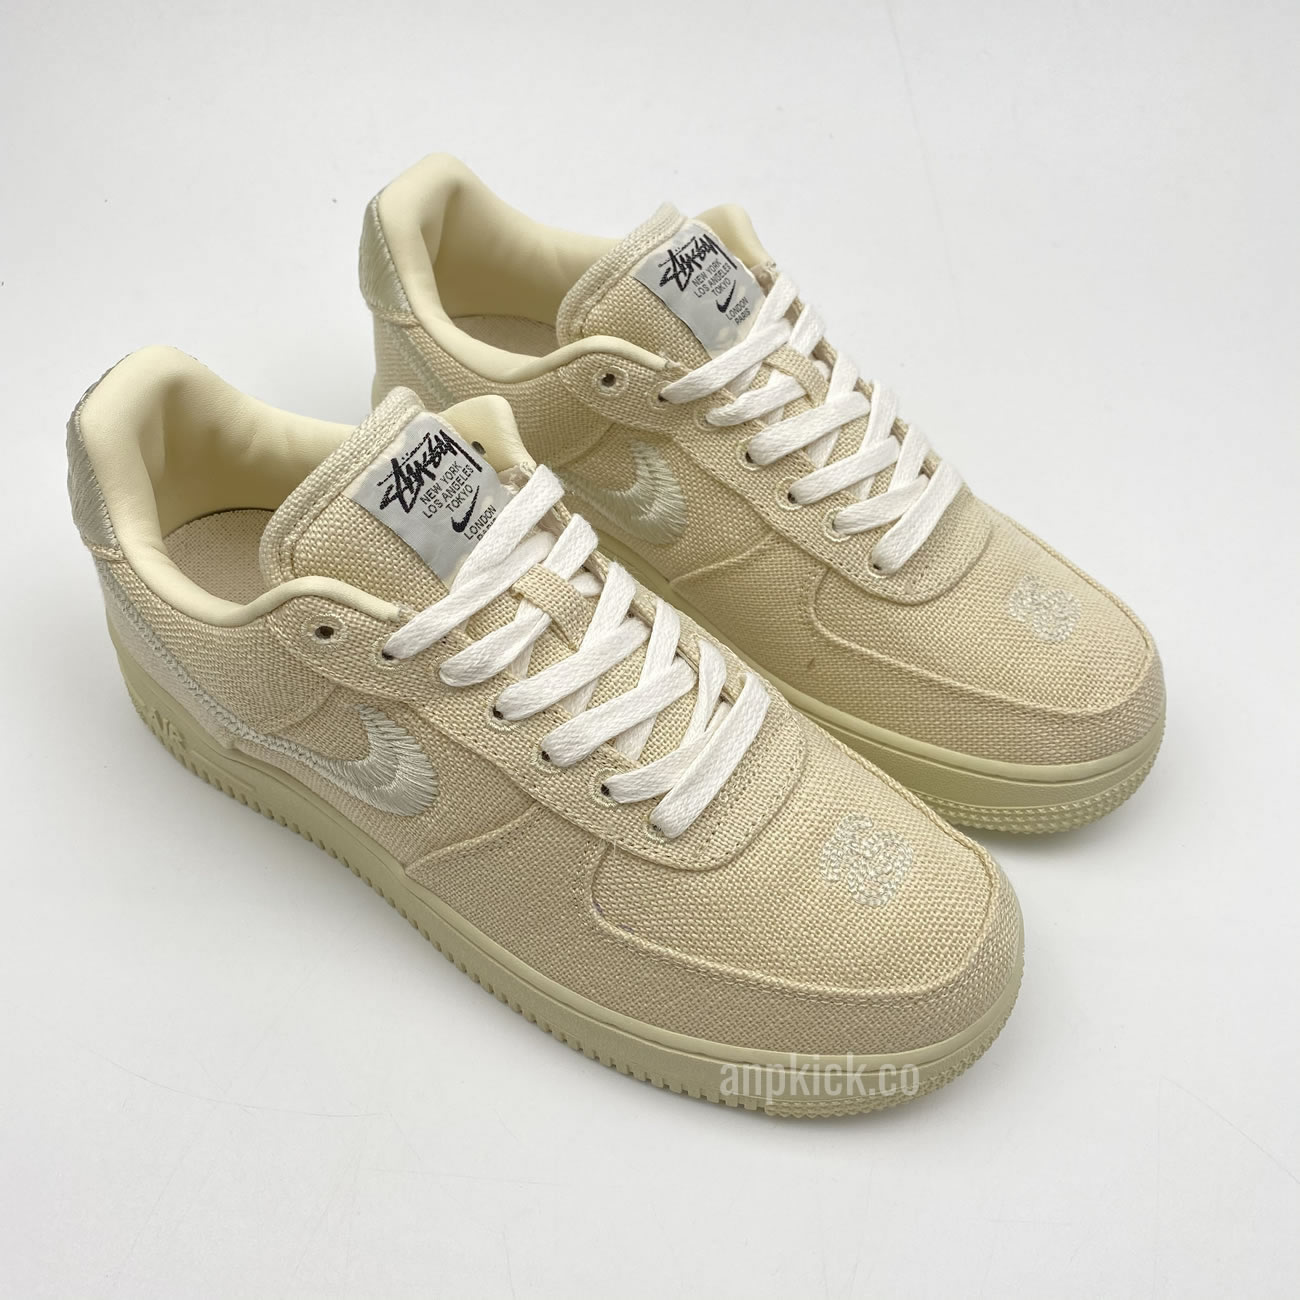 Stussy Nike Air Force 1 Low Fossil Stone Cz9084 200 Release Date (2) - newkick.org